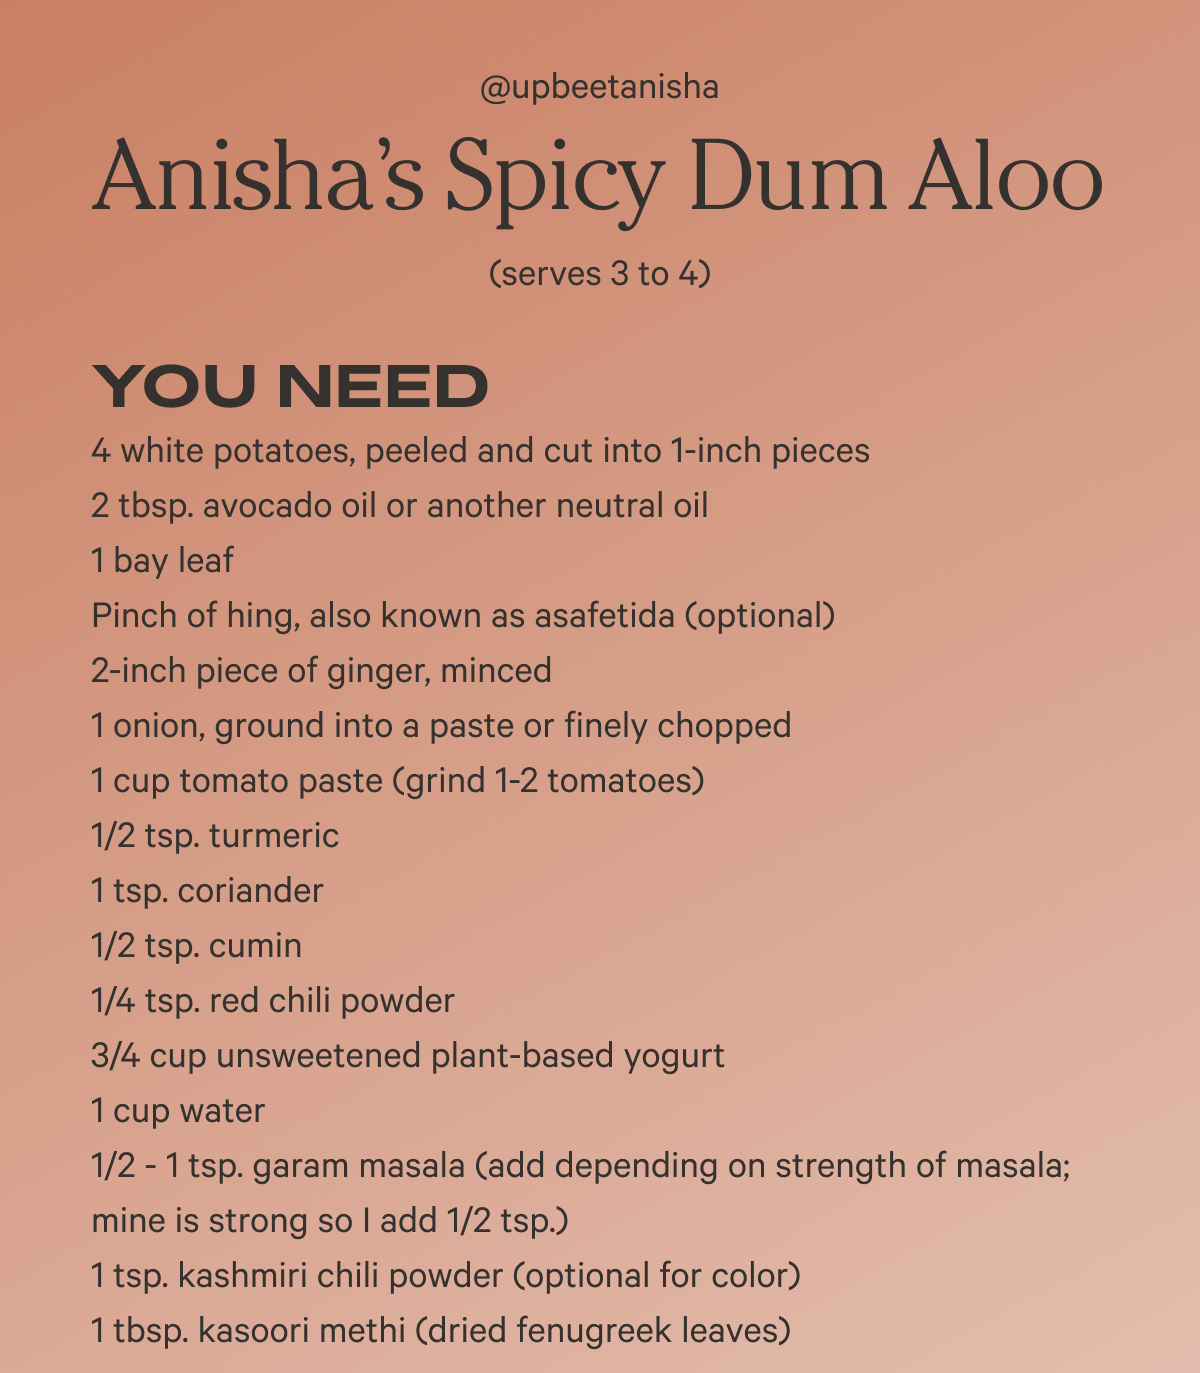 Anisha’s Spicy Dum Aloo @upbeetanisha (serves 3 to 4)  YOU NEED 4 white potatoes, peeled and cut into 1-inch pieces 2 tbsp. avocado oil or another neutral oil 1 bay leaf Pinch of hing, also known as asafetida (optional) 2-inch piece of ginger, minced 1 onion, ground into a paste or finely chopped 1 cup tomato paste (grind 1-2 tomatoes) 1/2 tsp. turmeric 1 tsp. coriander 1/2 tsp. cumin 1/4 tsp. red chili powder 3/4 cup unsweetened plant-based yogurt 1 cup water 1/2 - 1 tsp. garam masala (add depending on strength of masala; mine is strong so I add 1/2 tsp.) 1 tsp. kashmiri chili powder (optional for color) 1 tbsp. kasoori methi (dried fenugreek leaves)